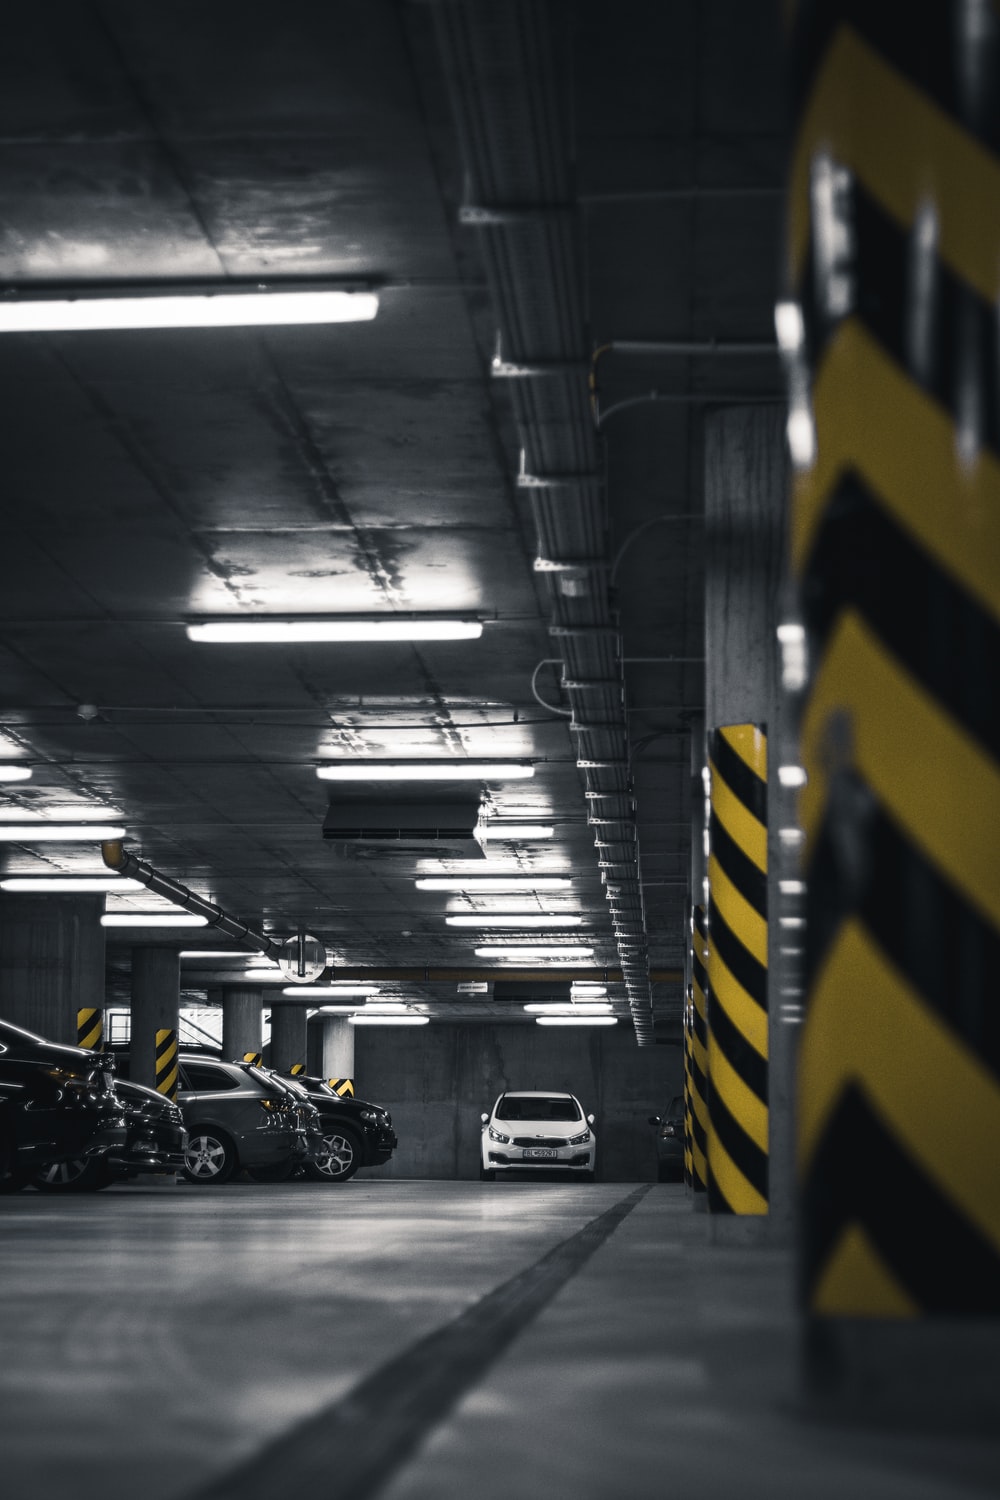 Car Parking Multiplayer Wallpapers - Wallpaper Cave